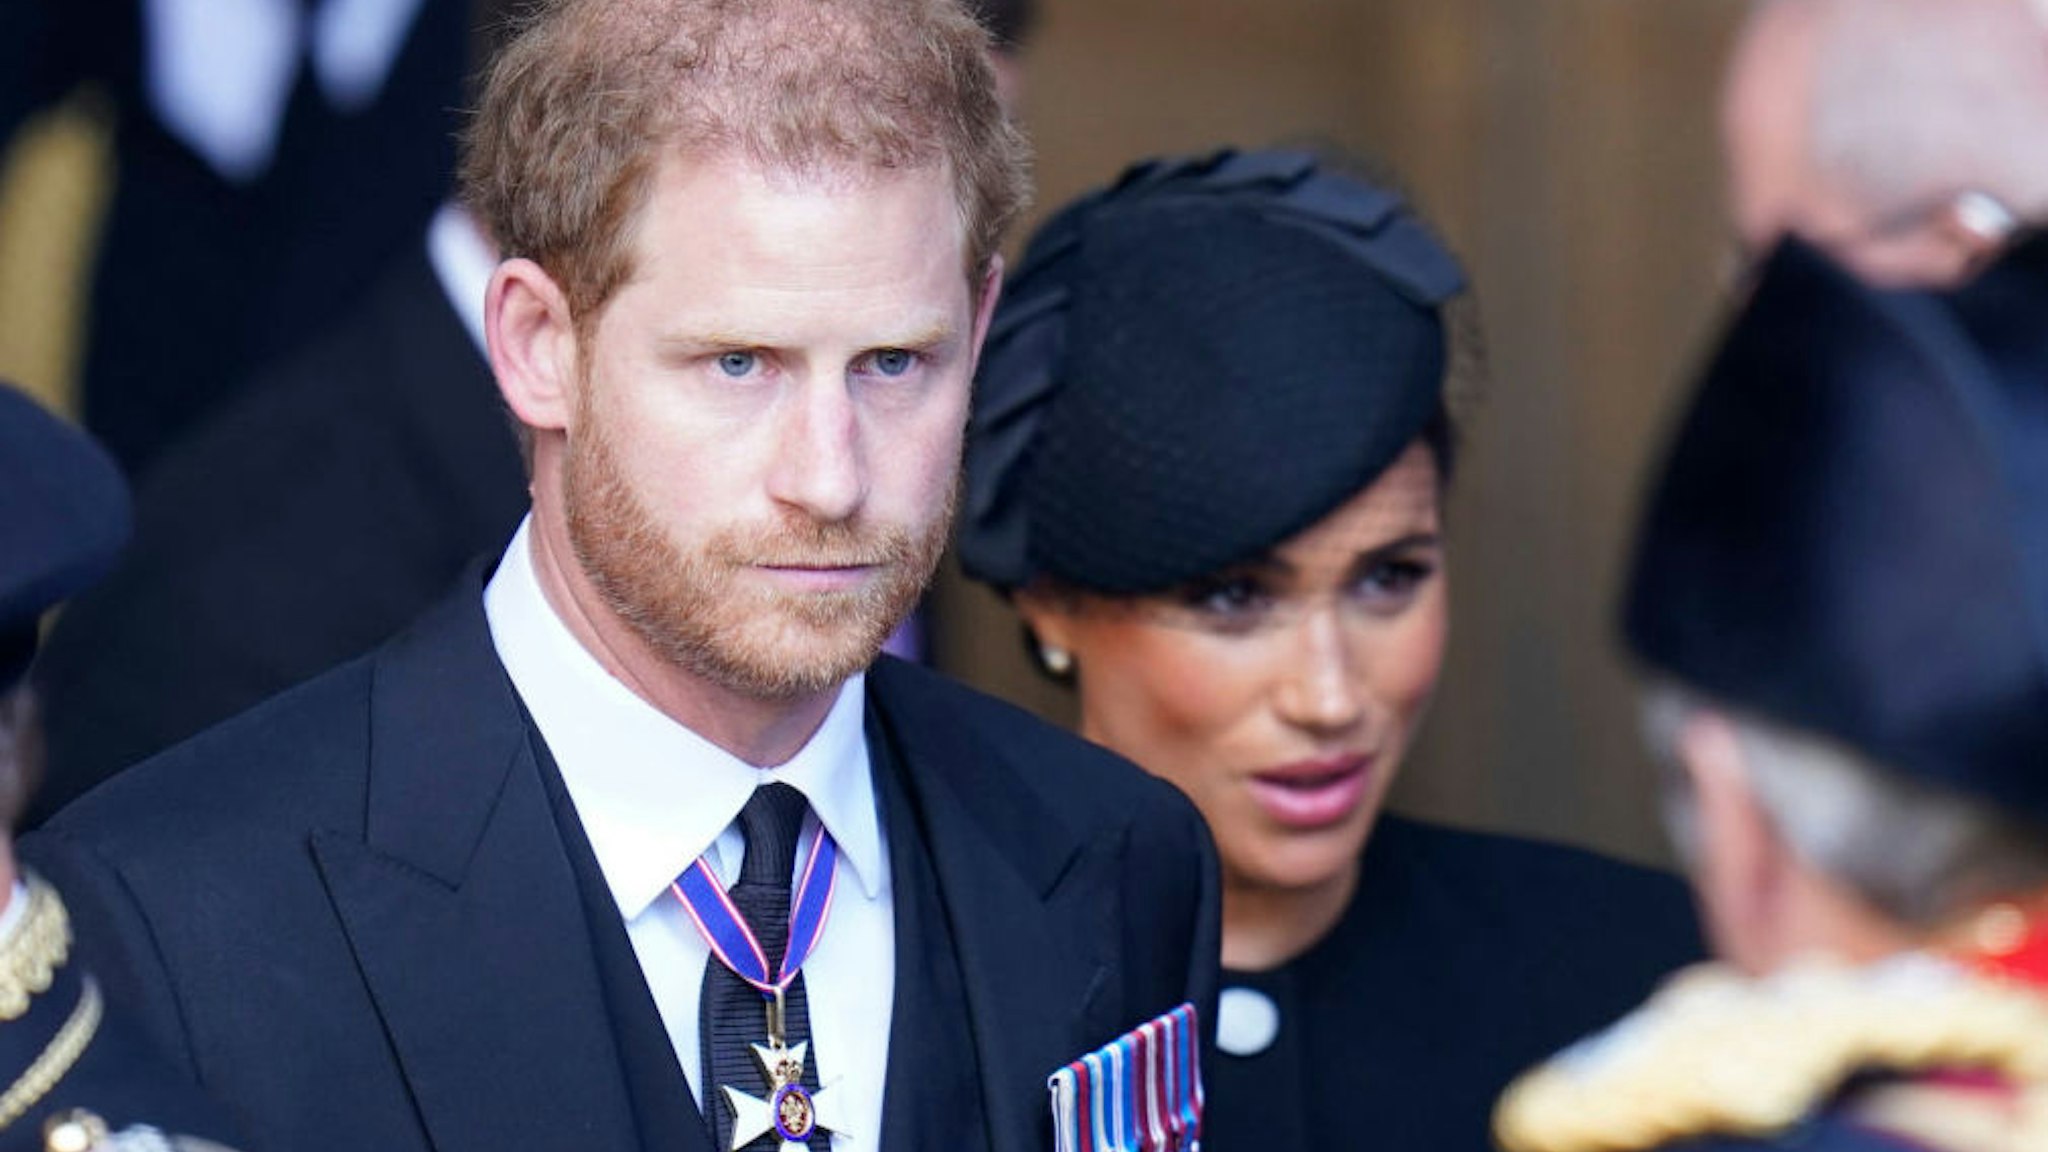 Prince Harry and Meghan, Duchess of Sussex leave Westminster Hall, London after the coffin of Queen Elizabeth II was brought to the hall to lie in state ahead of her funeral on Monday on September 14, 2022 in London, England.